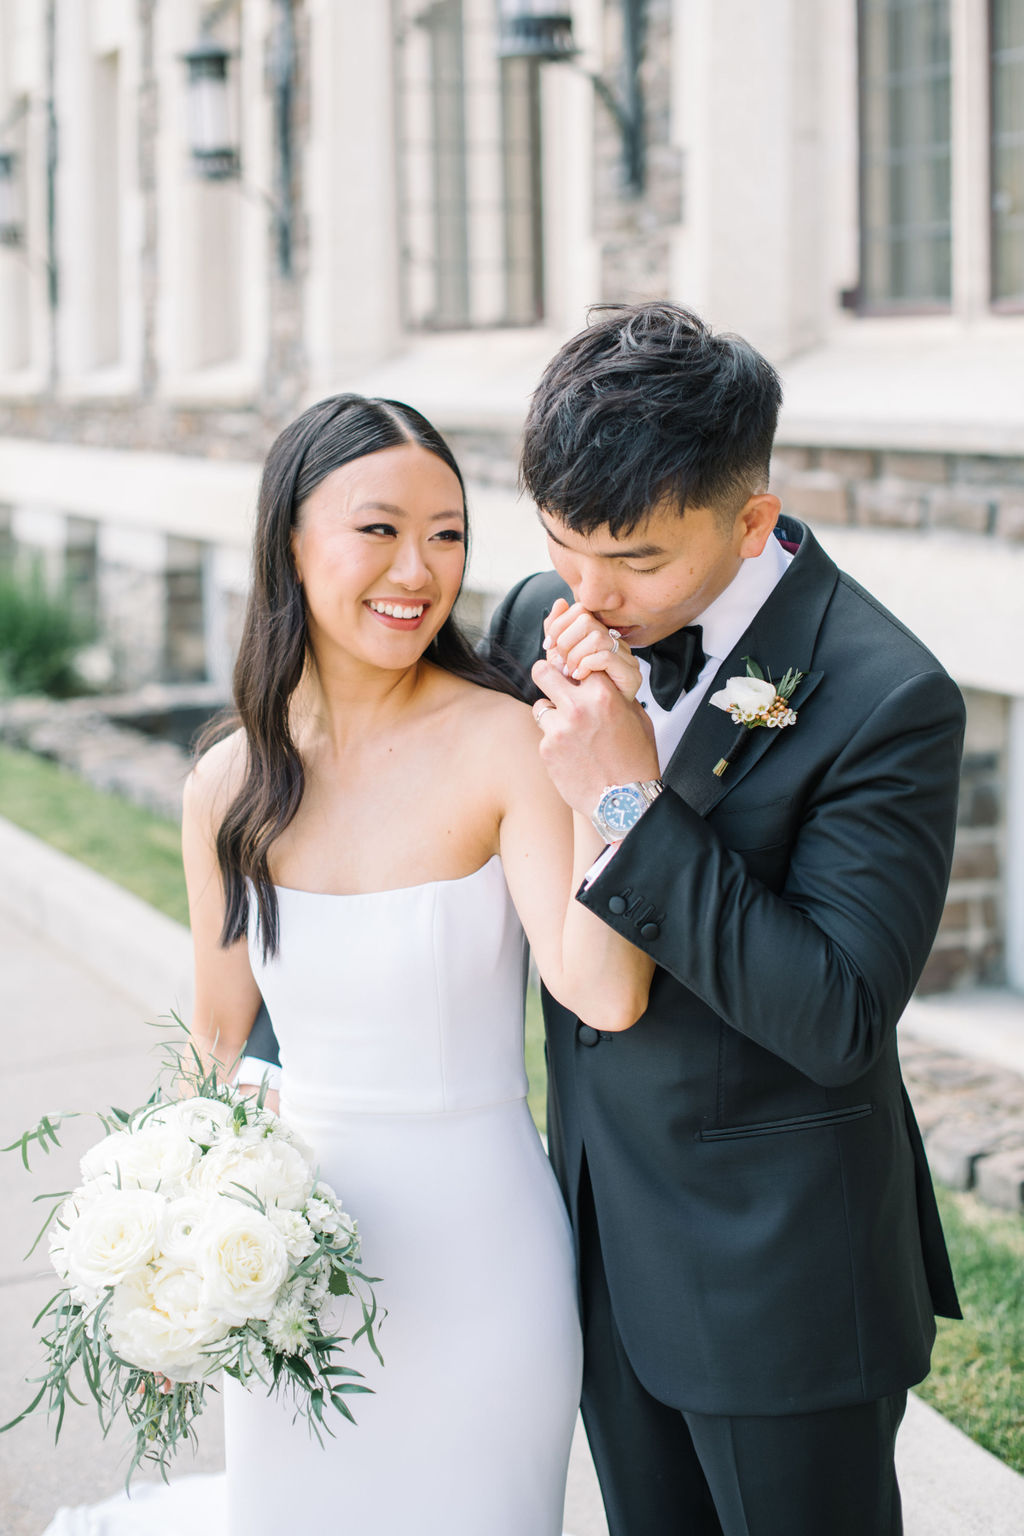 Bride and groom at their Fairmont Banff Springs Golf and Country Club wedding. Bride wearing sleek form fitting white bridal gown, holding classic bouquet of white roses and greenery. Summer wedding inspiration in Banff, Alberta. 